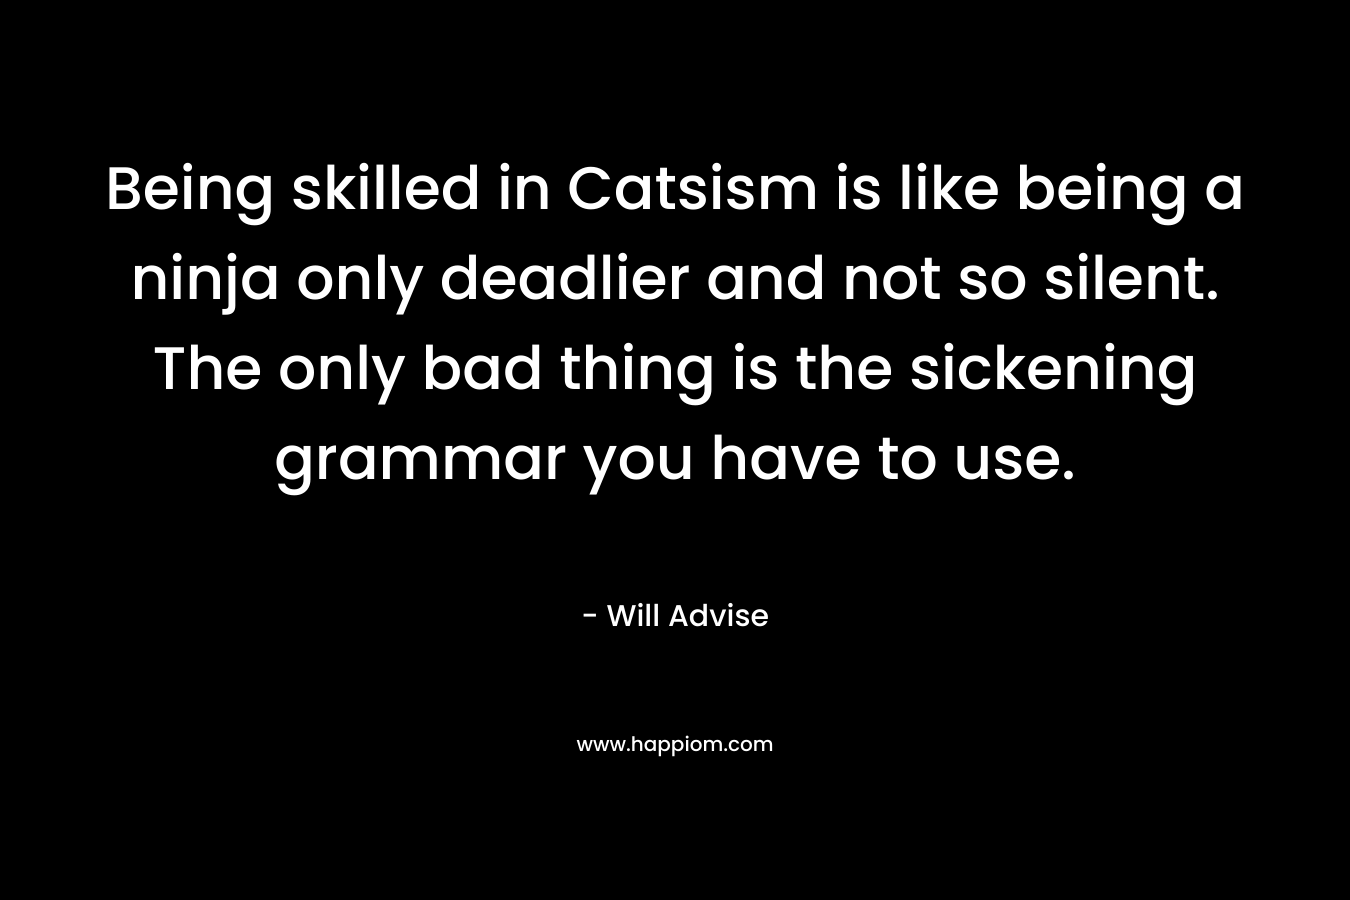 Being skilled in Catsism is like being a ninja only deadlier and not so silent. The only bad thing is the sickening grammar you have to use. – Will Advise